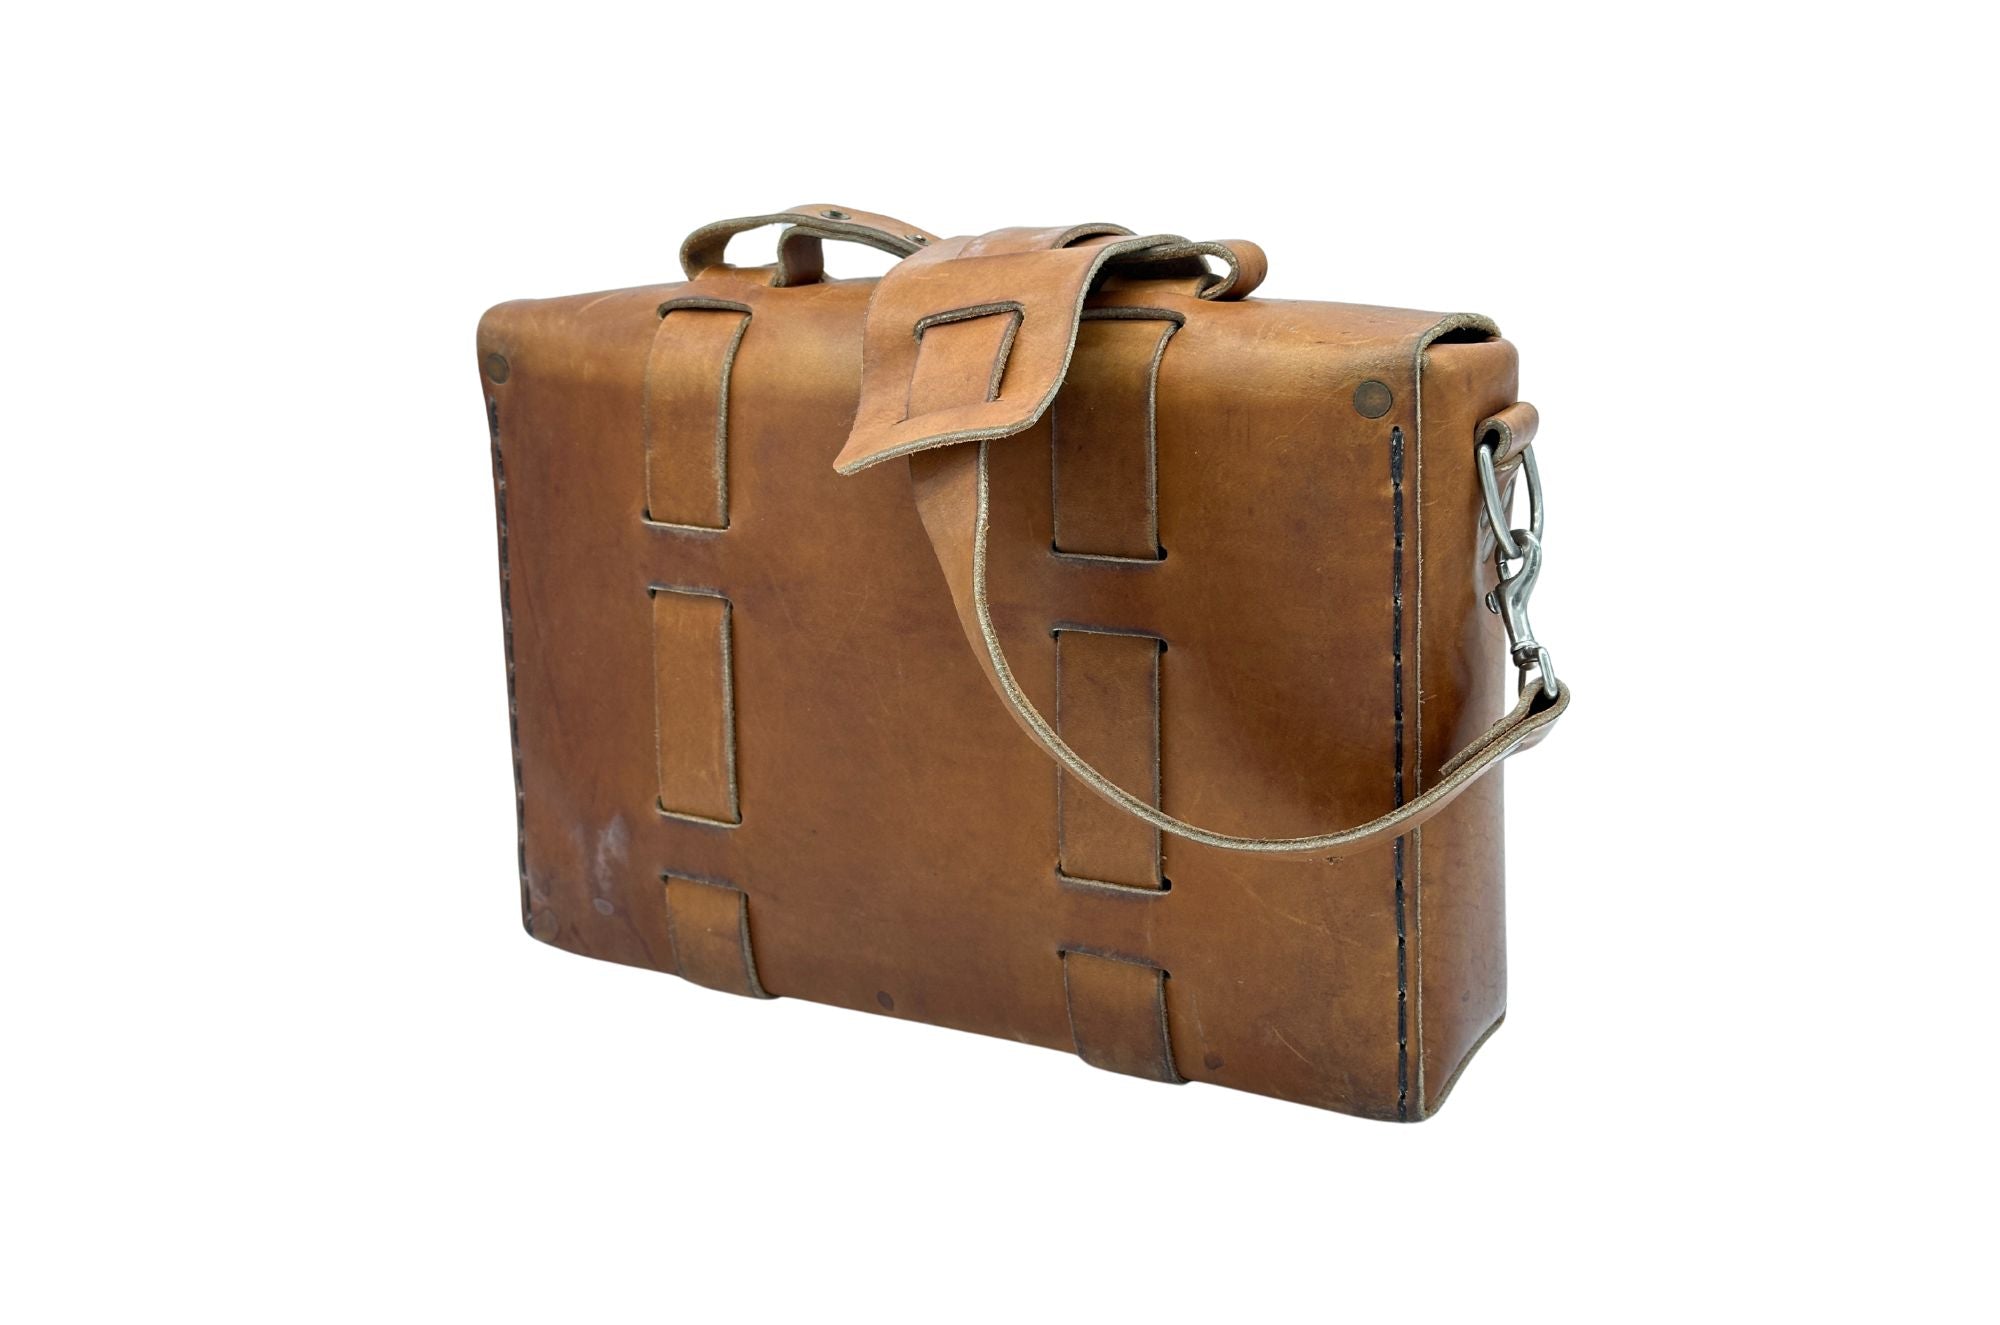 SEASONED No. 4313 - Minimalist Standard Leather Satchel in Horween's Bourbon Brown - ONLY TWO BAGS WERE MADE